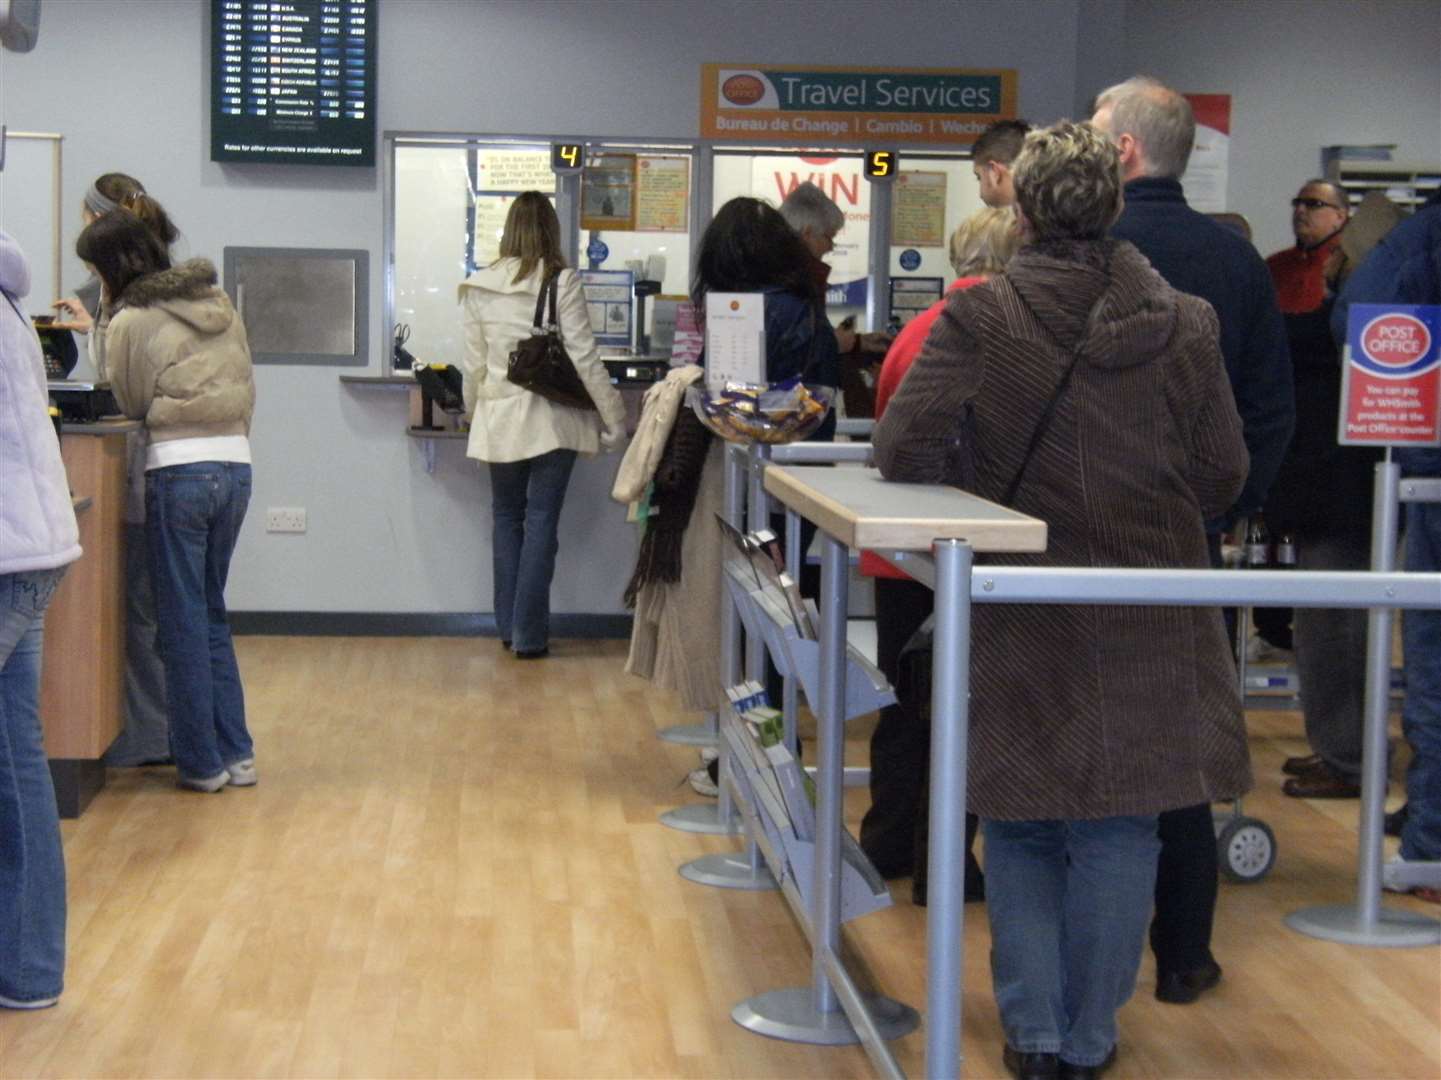 The Post Office within WHSmith, Gravesend, when it opened in 2008